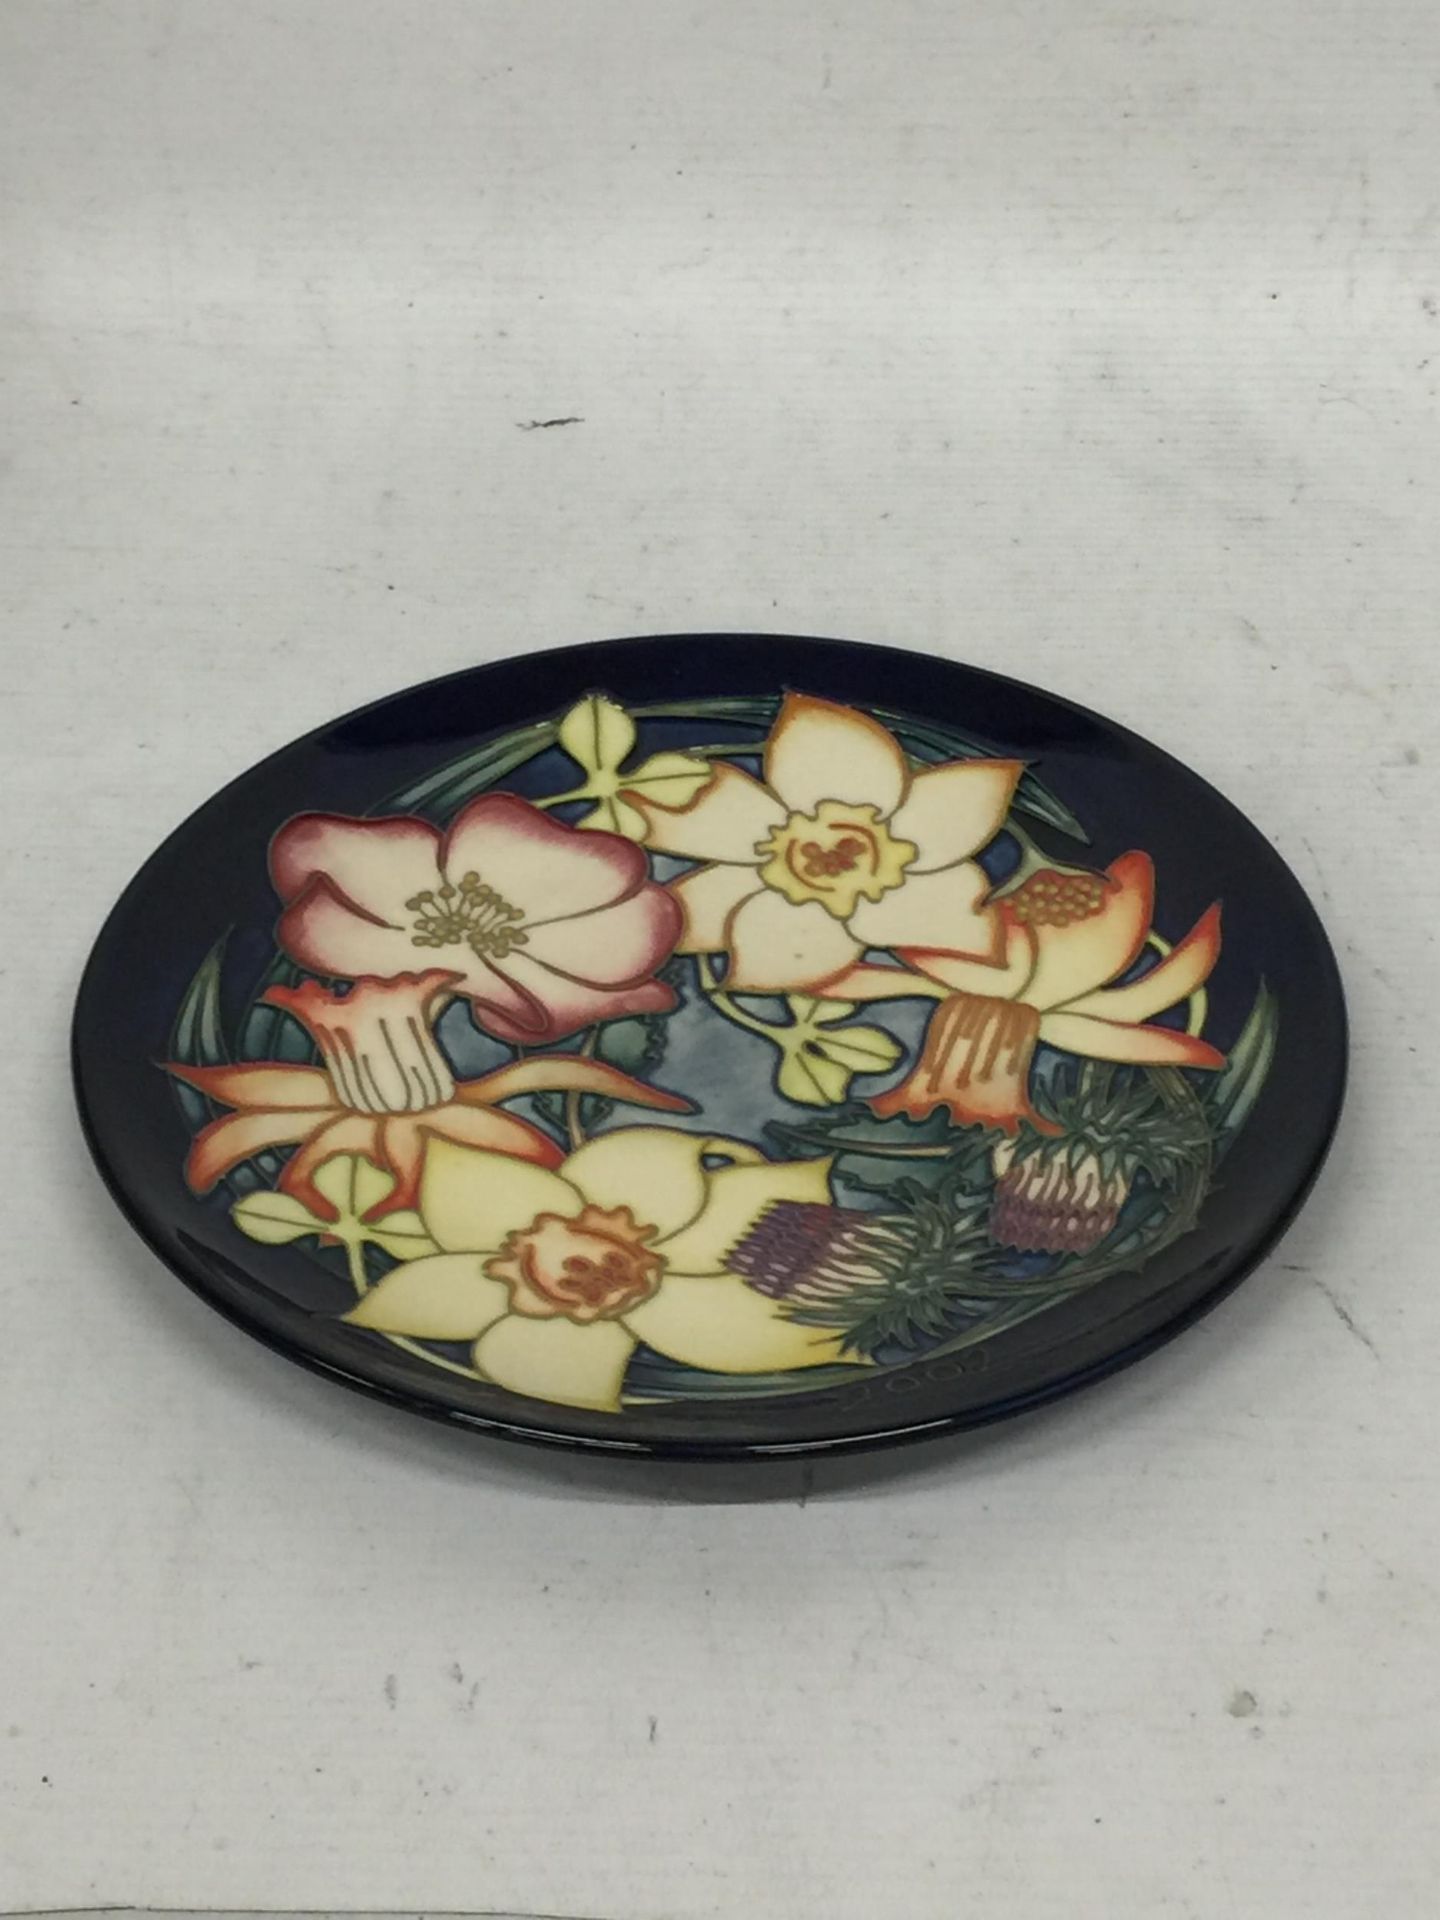 A MOORCROFT POTTERY GOLDEN JUBILEE PLATE, LIMITED EDITION 119/750, DATED 2002